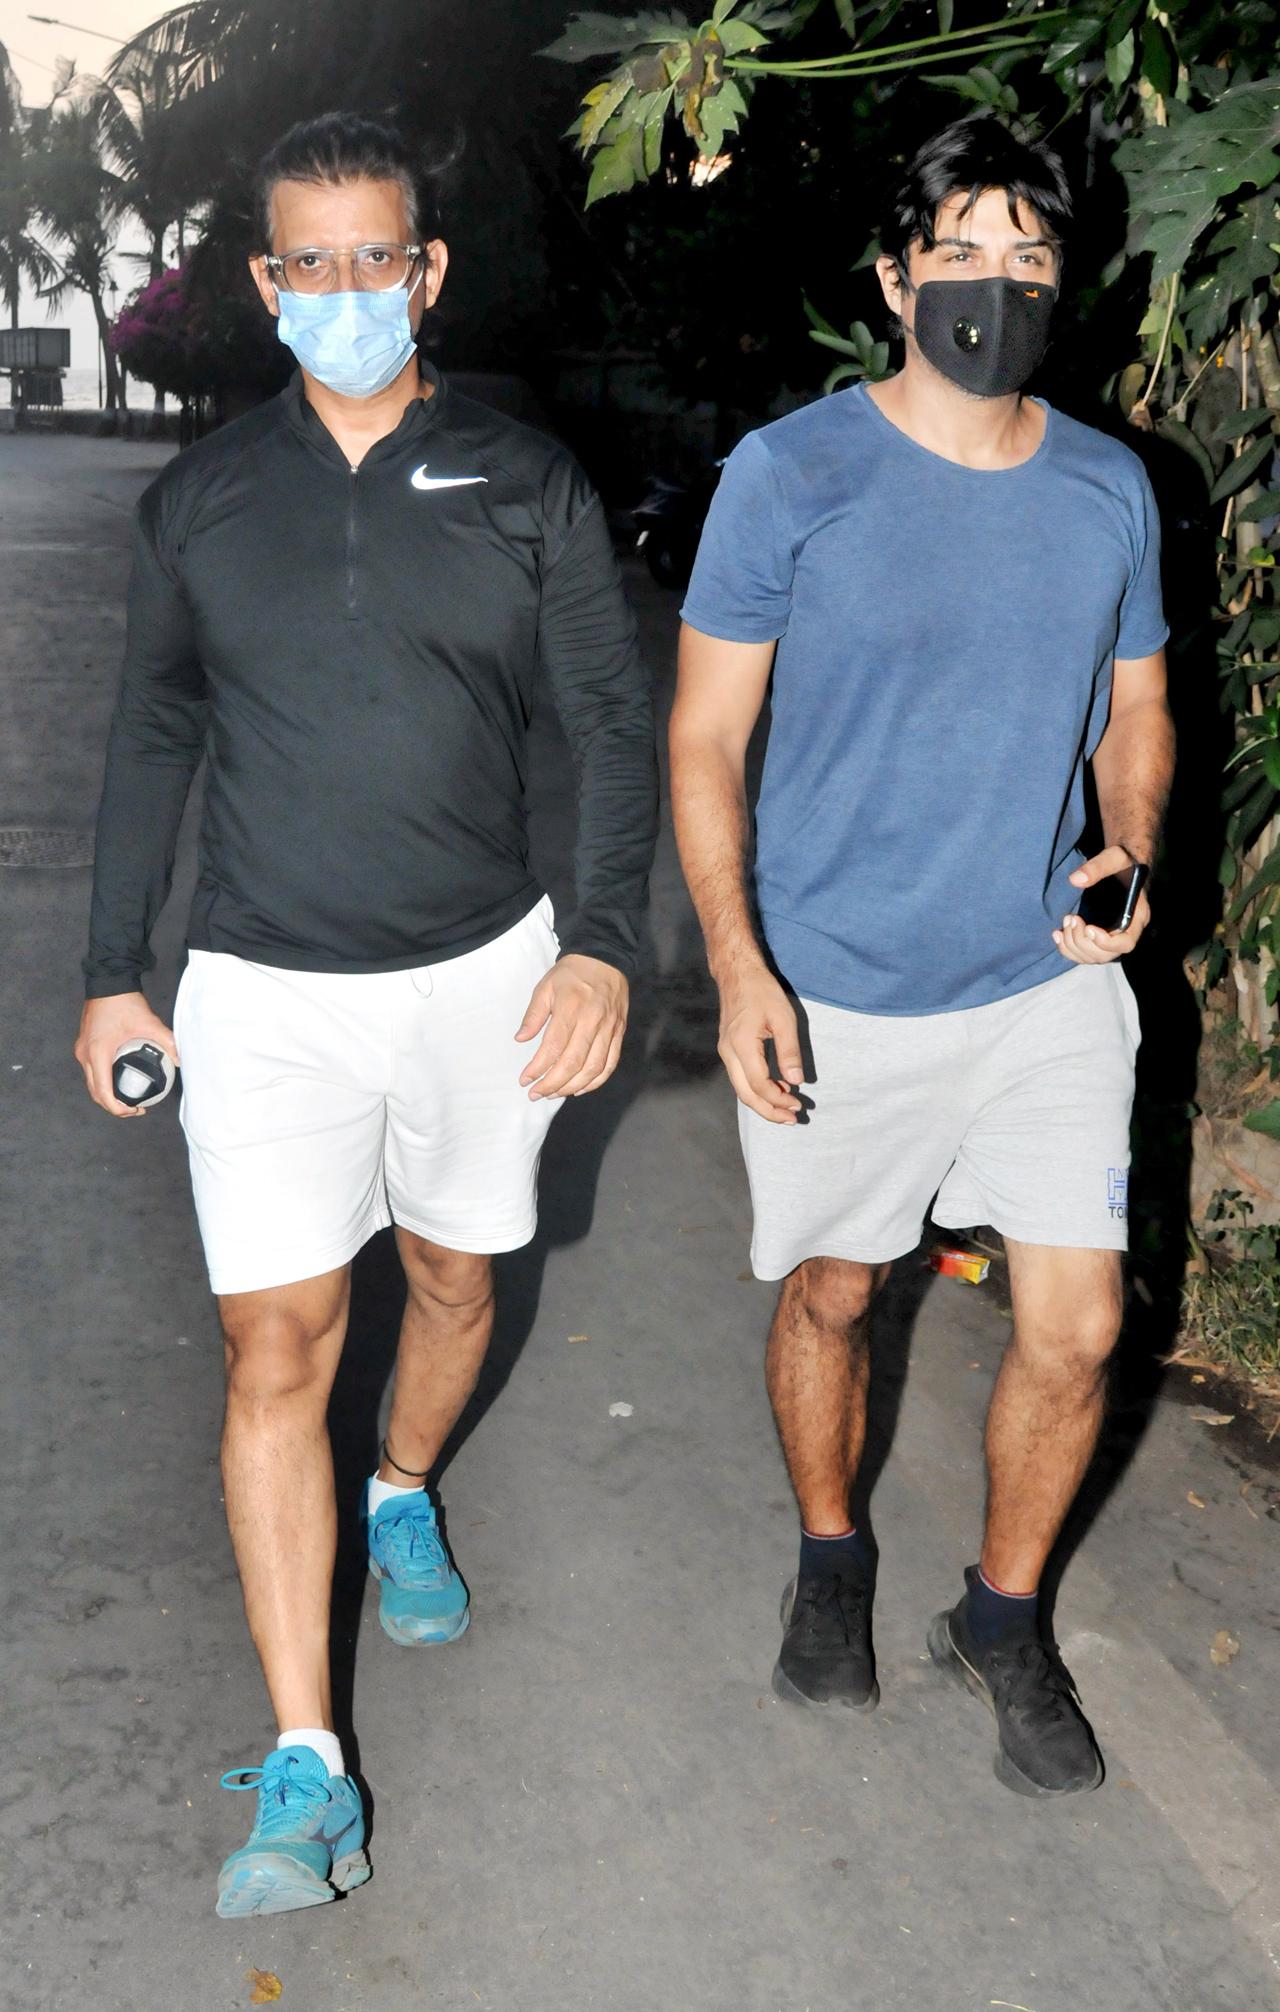 Sharman Joshi and Vikas Bhalla were also clicked at Bandstand, Bandra. Many might not know that the actors are related to each other as they are veteran actor Prem Chopra's sons-in-law.